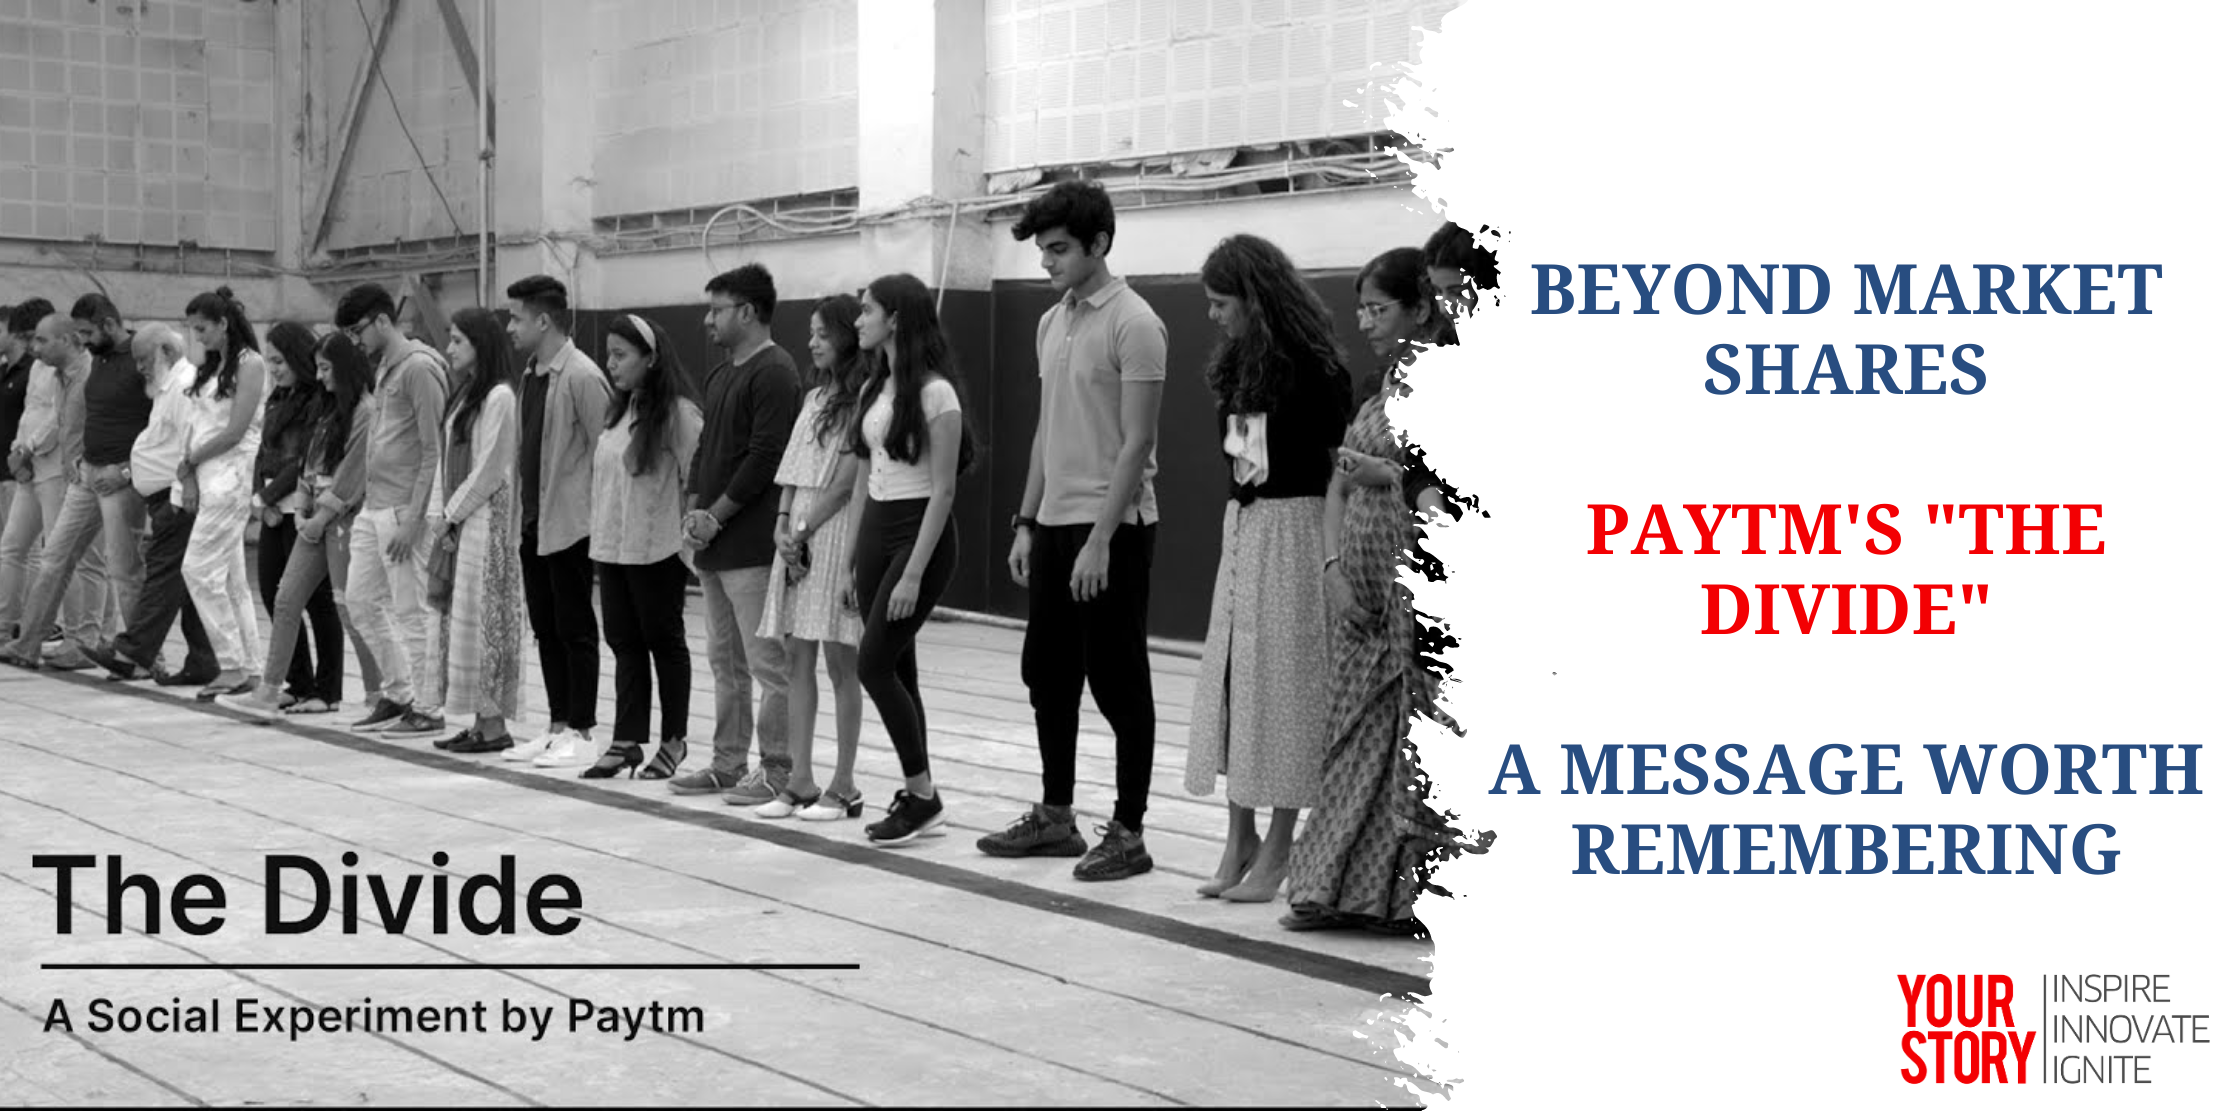 Beyond Market Shares: Paytm's "The Divide" - A Message Worth Remembering
